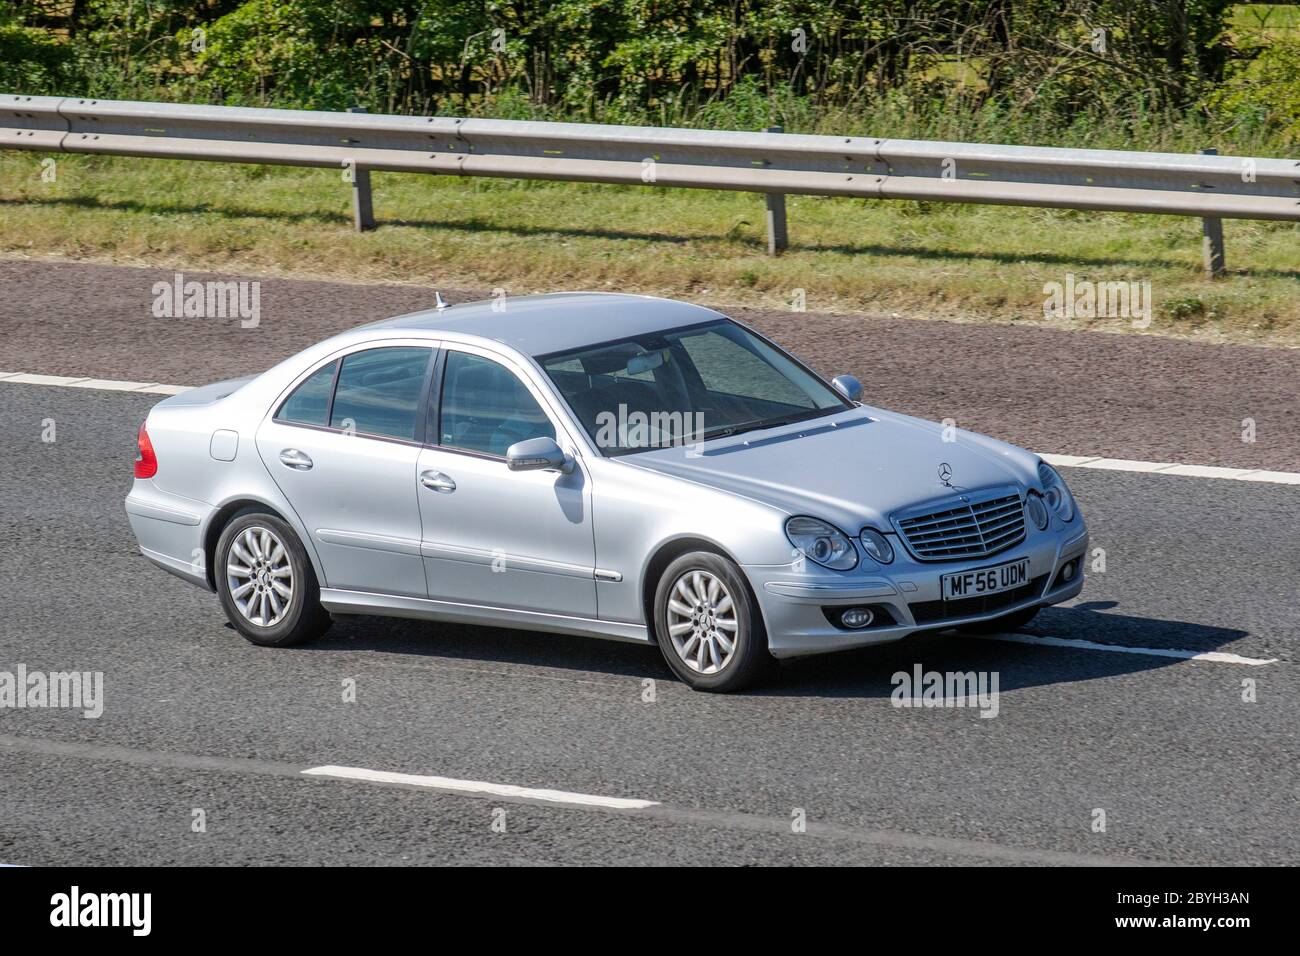 2006 silver Mercedes E280 CDI Elegance Auto; Vehicular traffic moving vehicles, cars driving vehicle on UK roads, motors, motoring on the M6 motorway Stock Photo